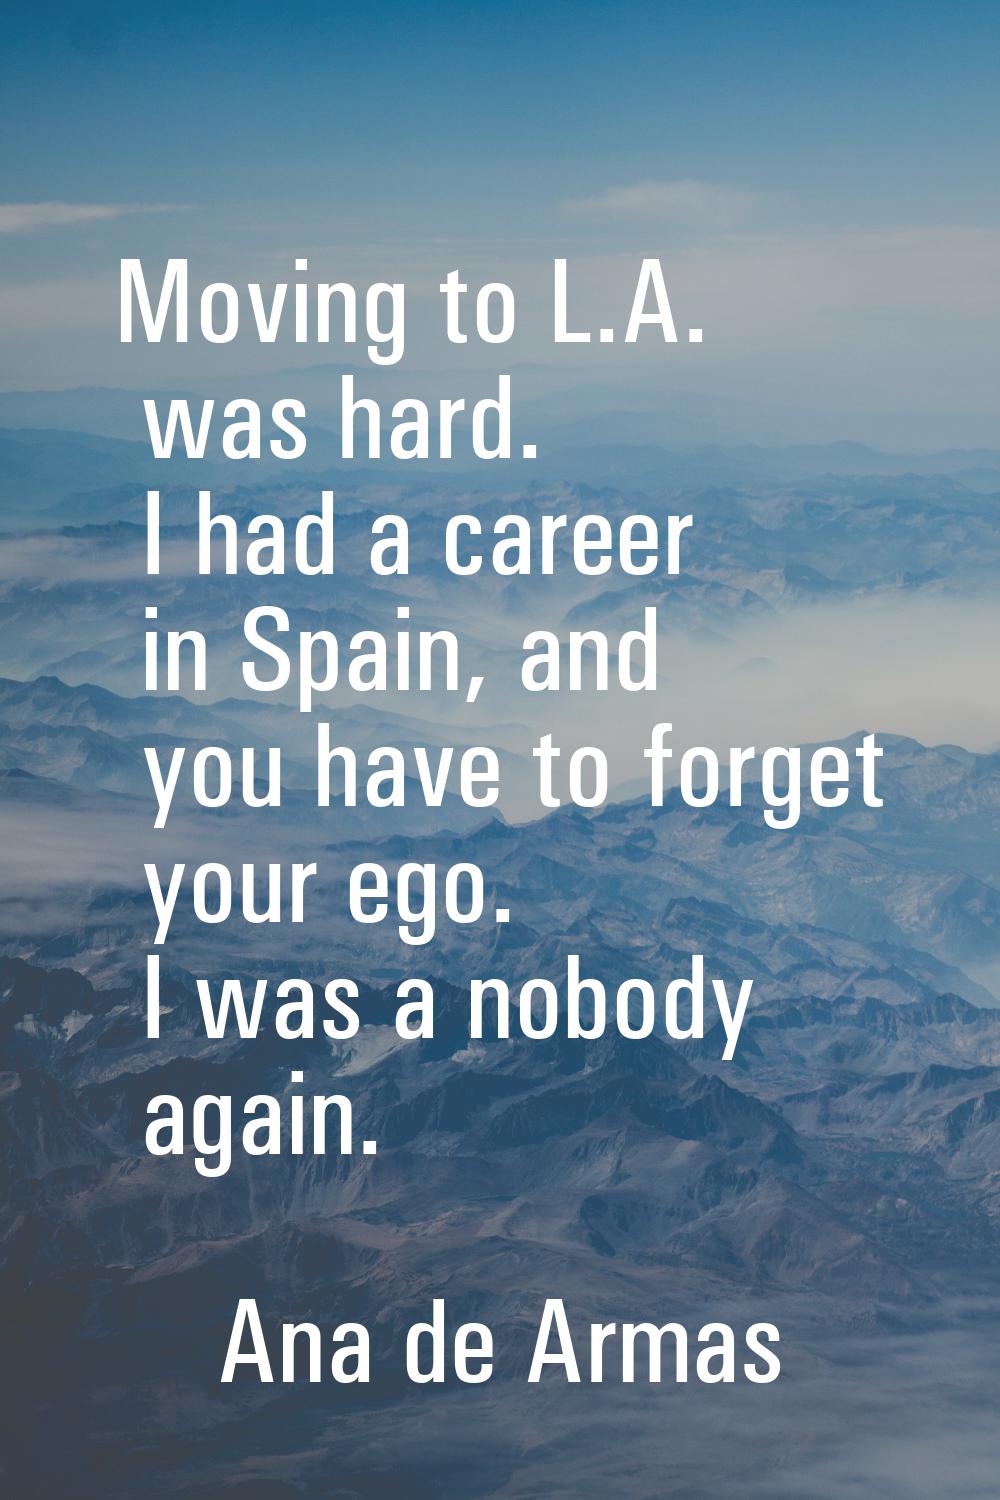 Moving to L.A. was hard. I had a career in Spain, and you have to forget your ego. I was a nobody a